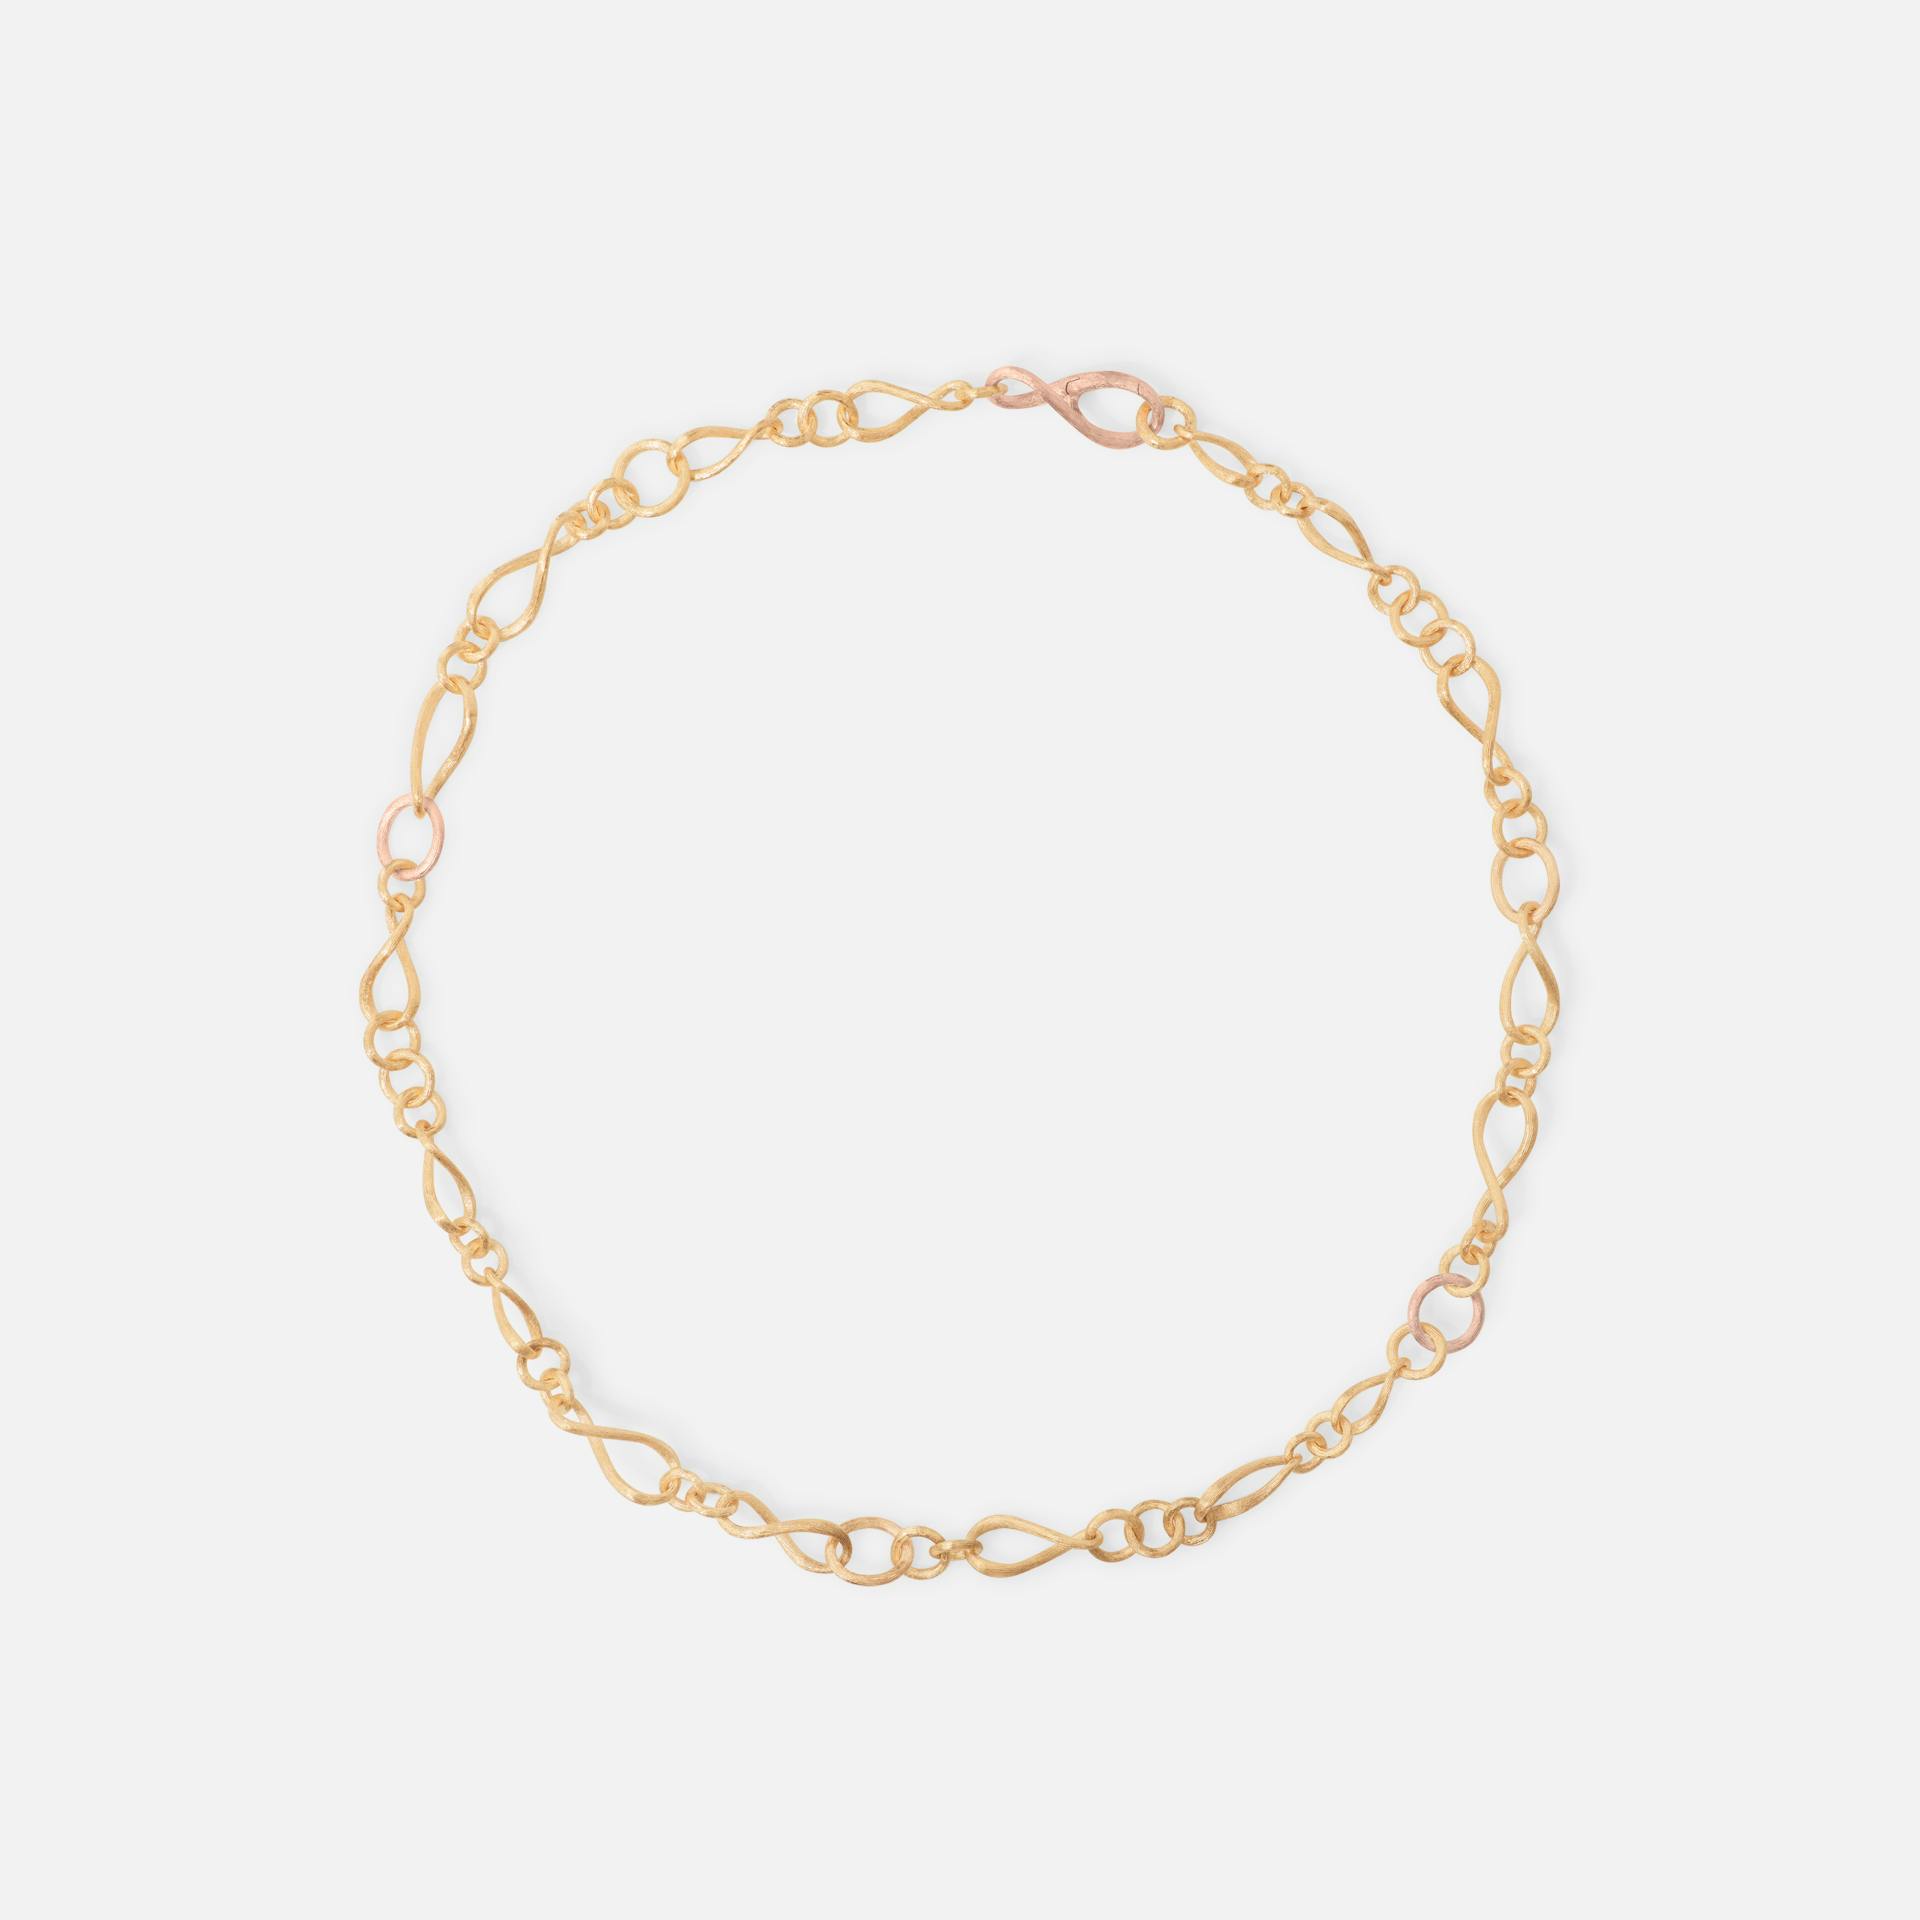 Love collier small Love Collier small YG/RG 42 cm 18k gold and rose gold